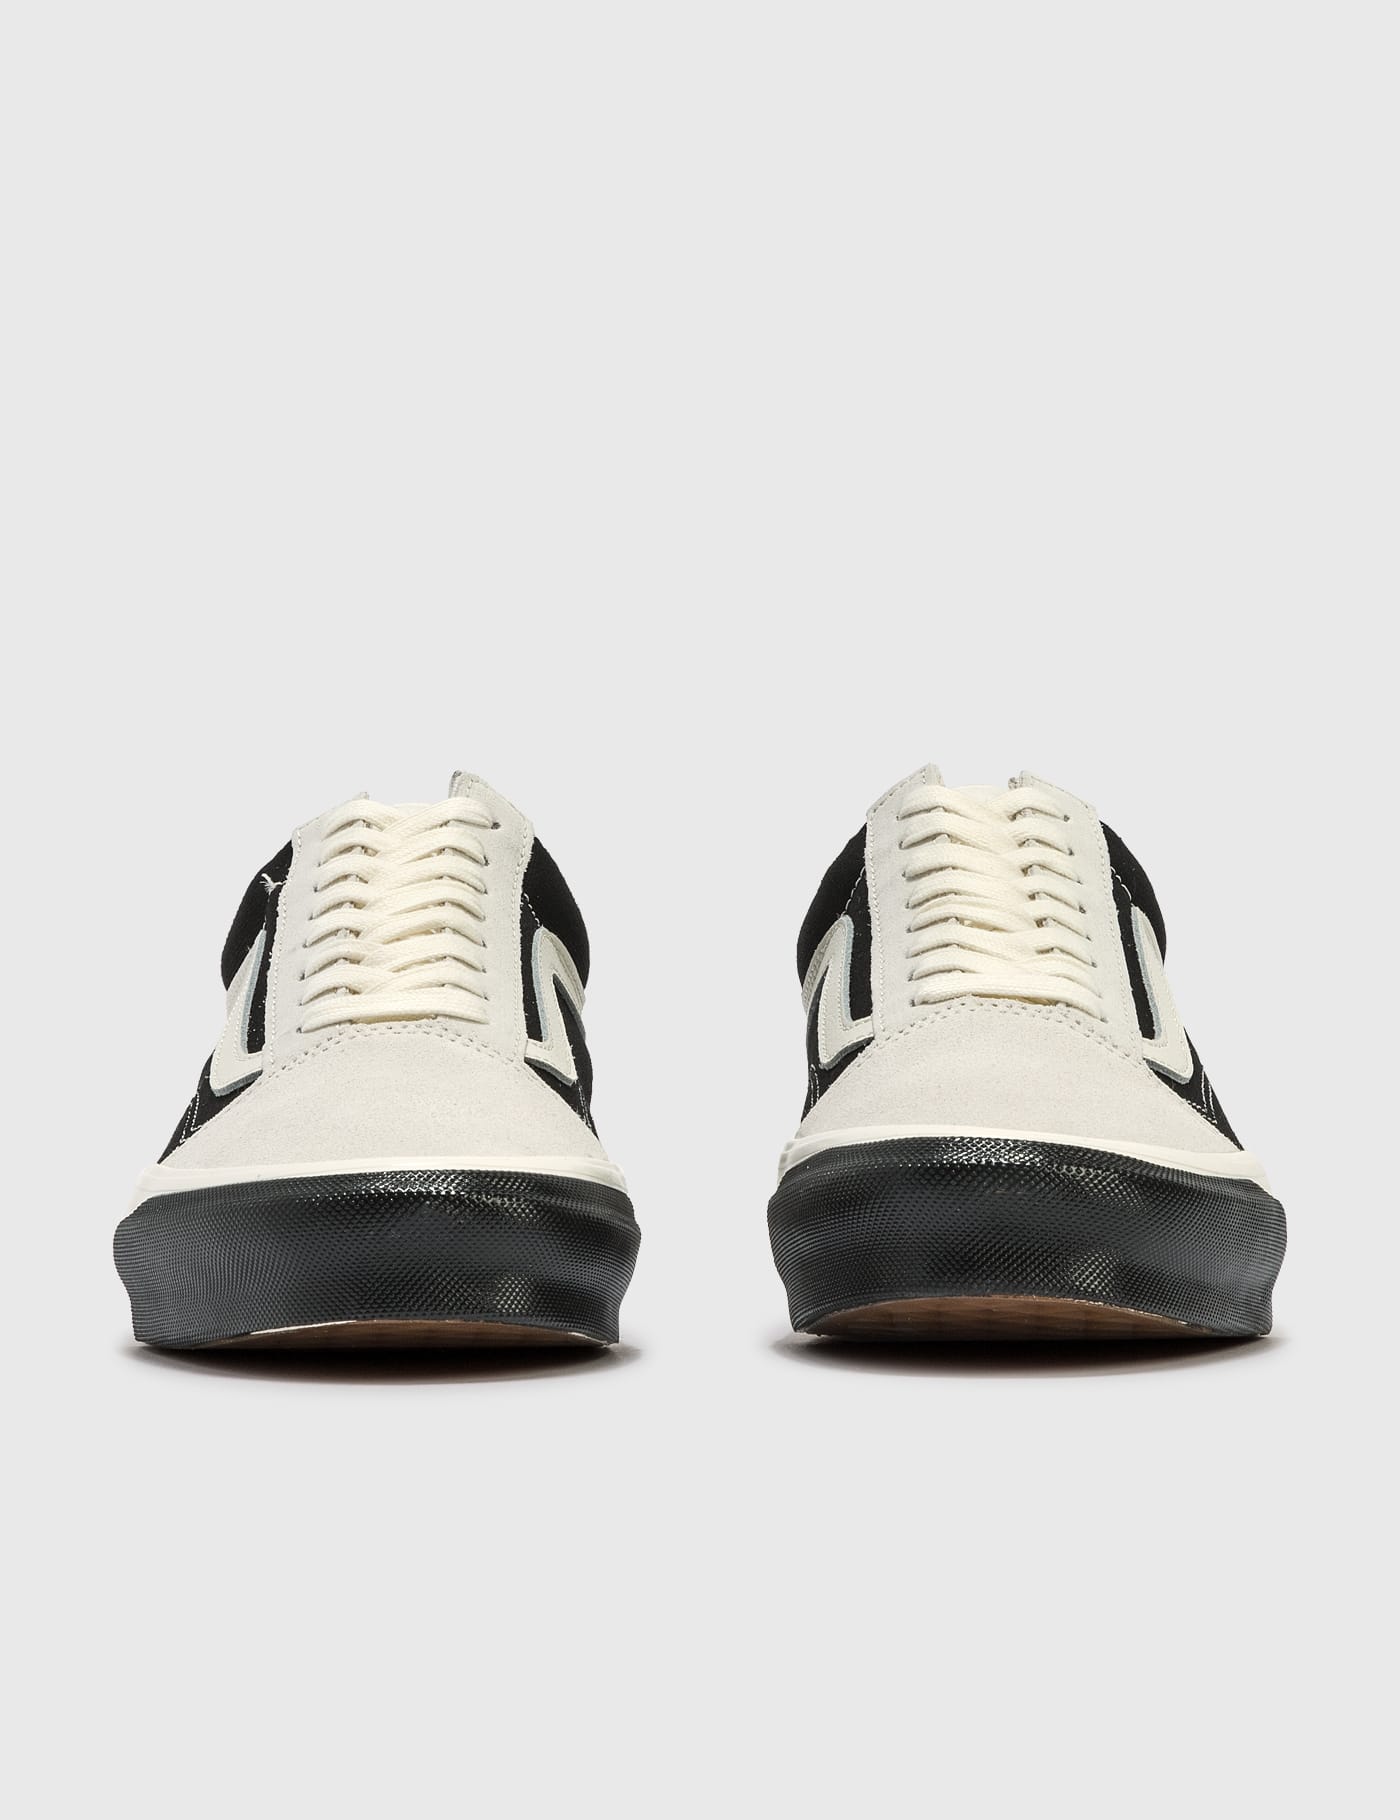 Vans - OG Old Skool LX | HBX - Globally Curated Fashion and Lifestyle by  Hypebeast